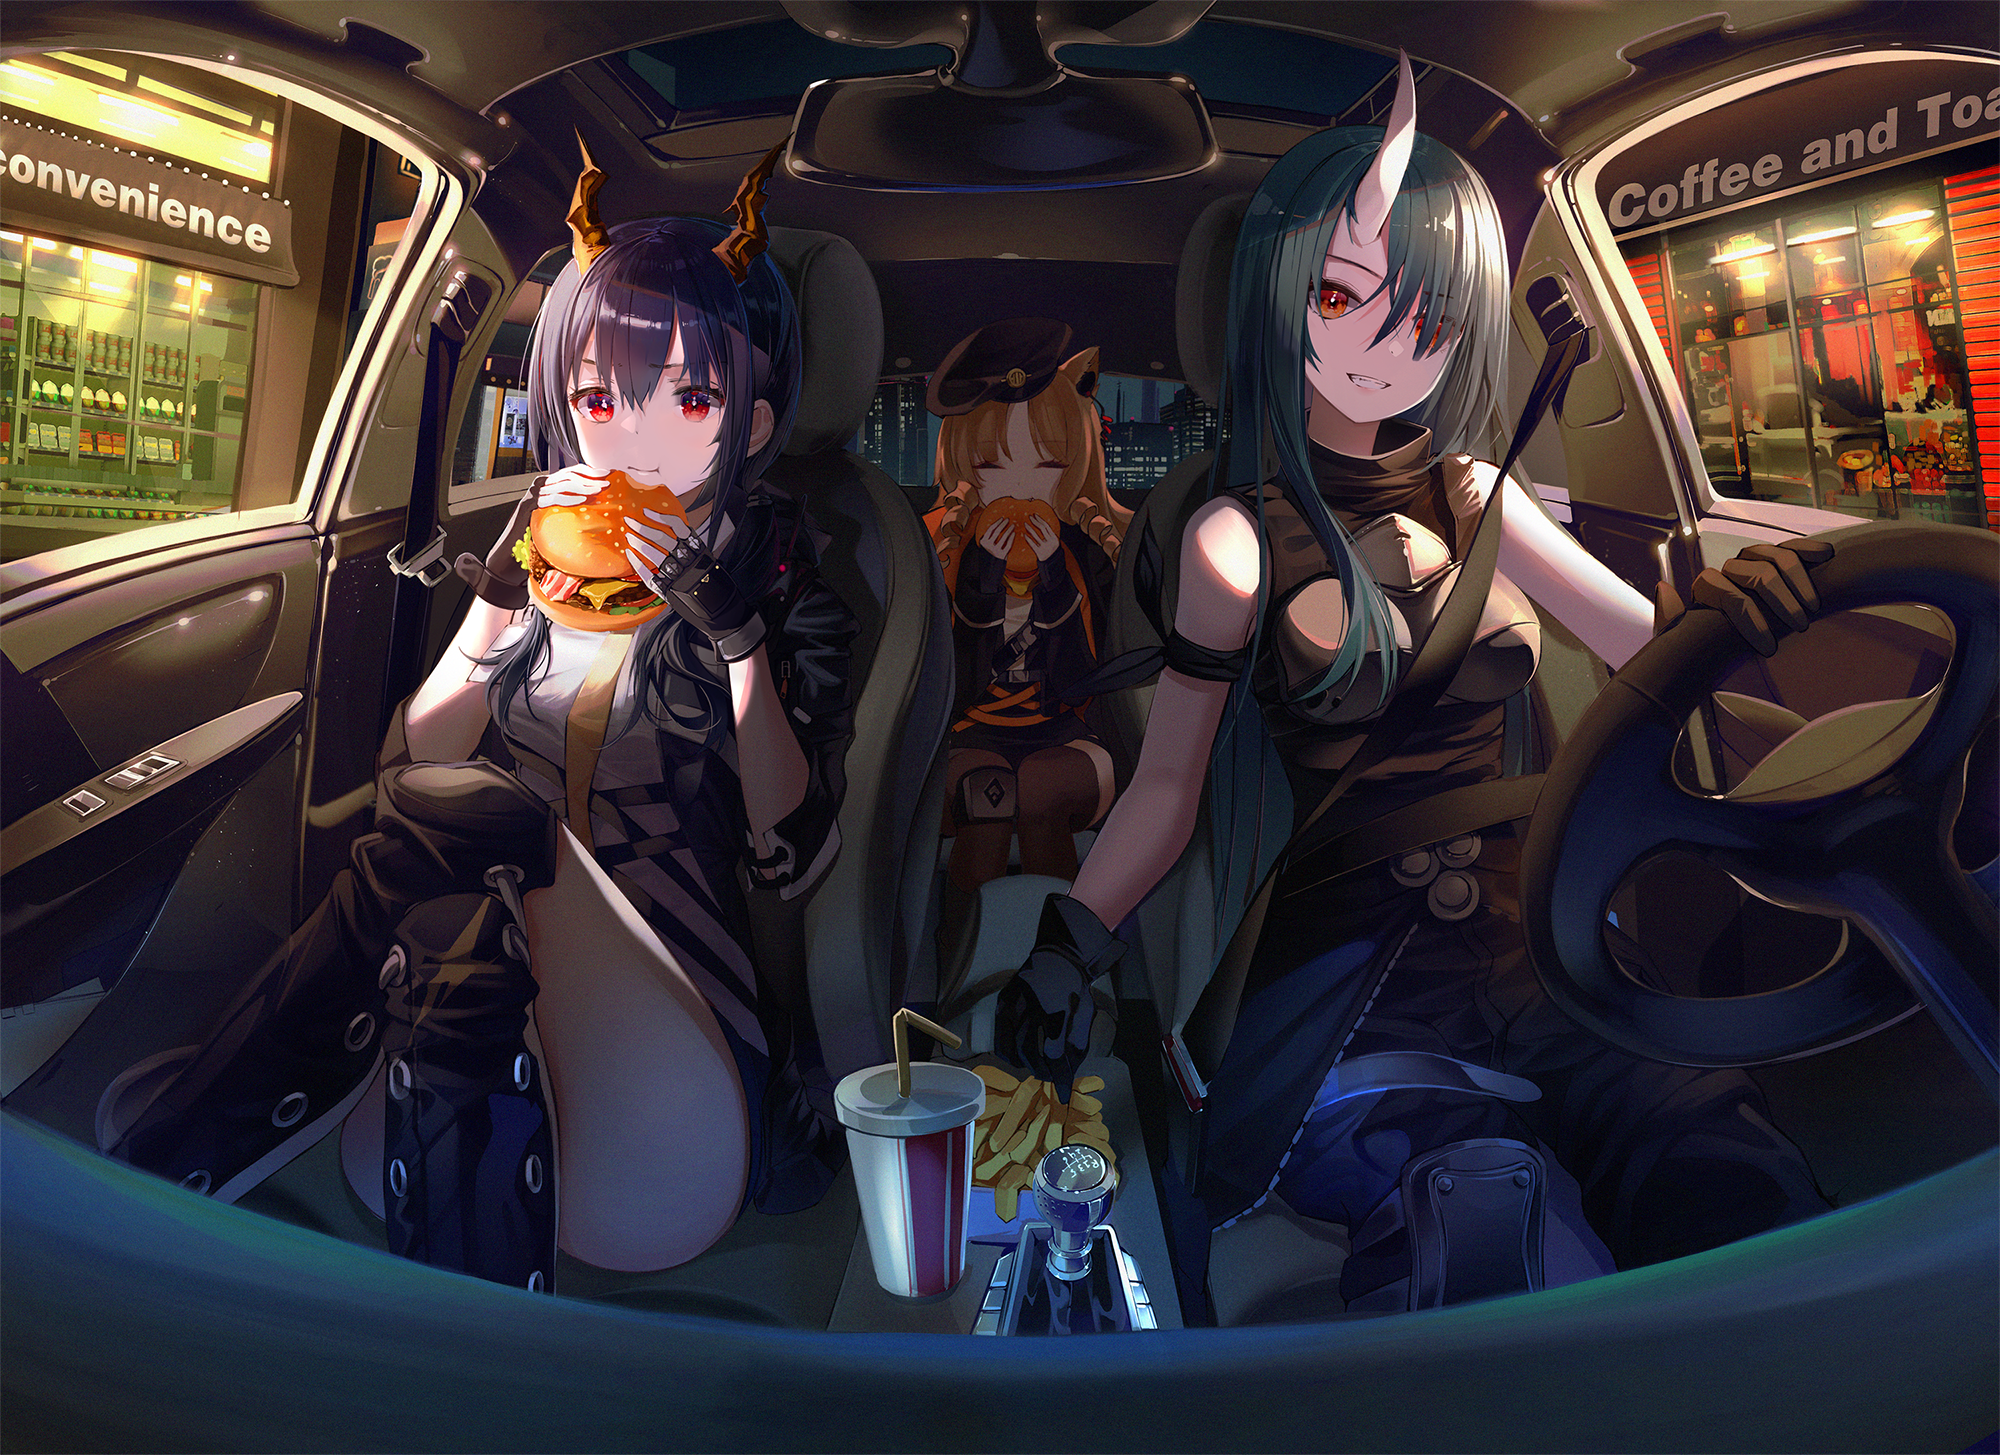 Arknights Anime Girls Anime Girls Eating Chen Arknights Hoshiguma Arknights Anime Swire Arknights In 2000x1455